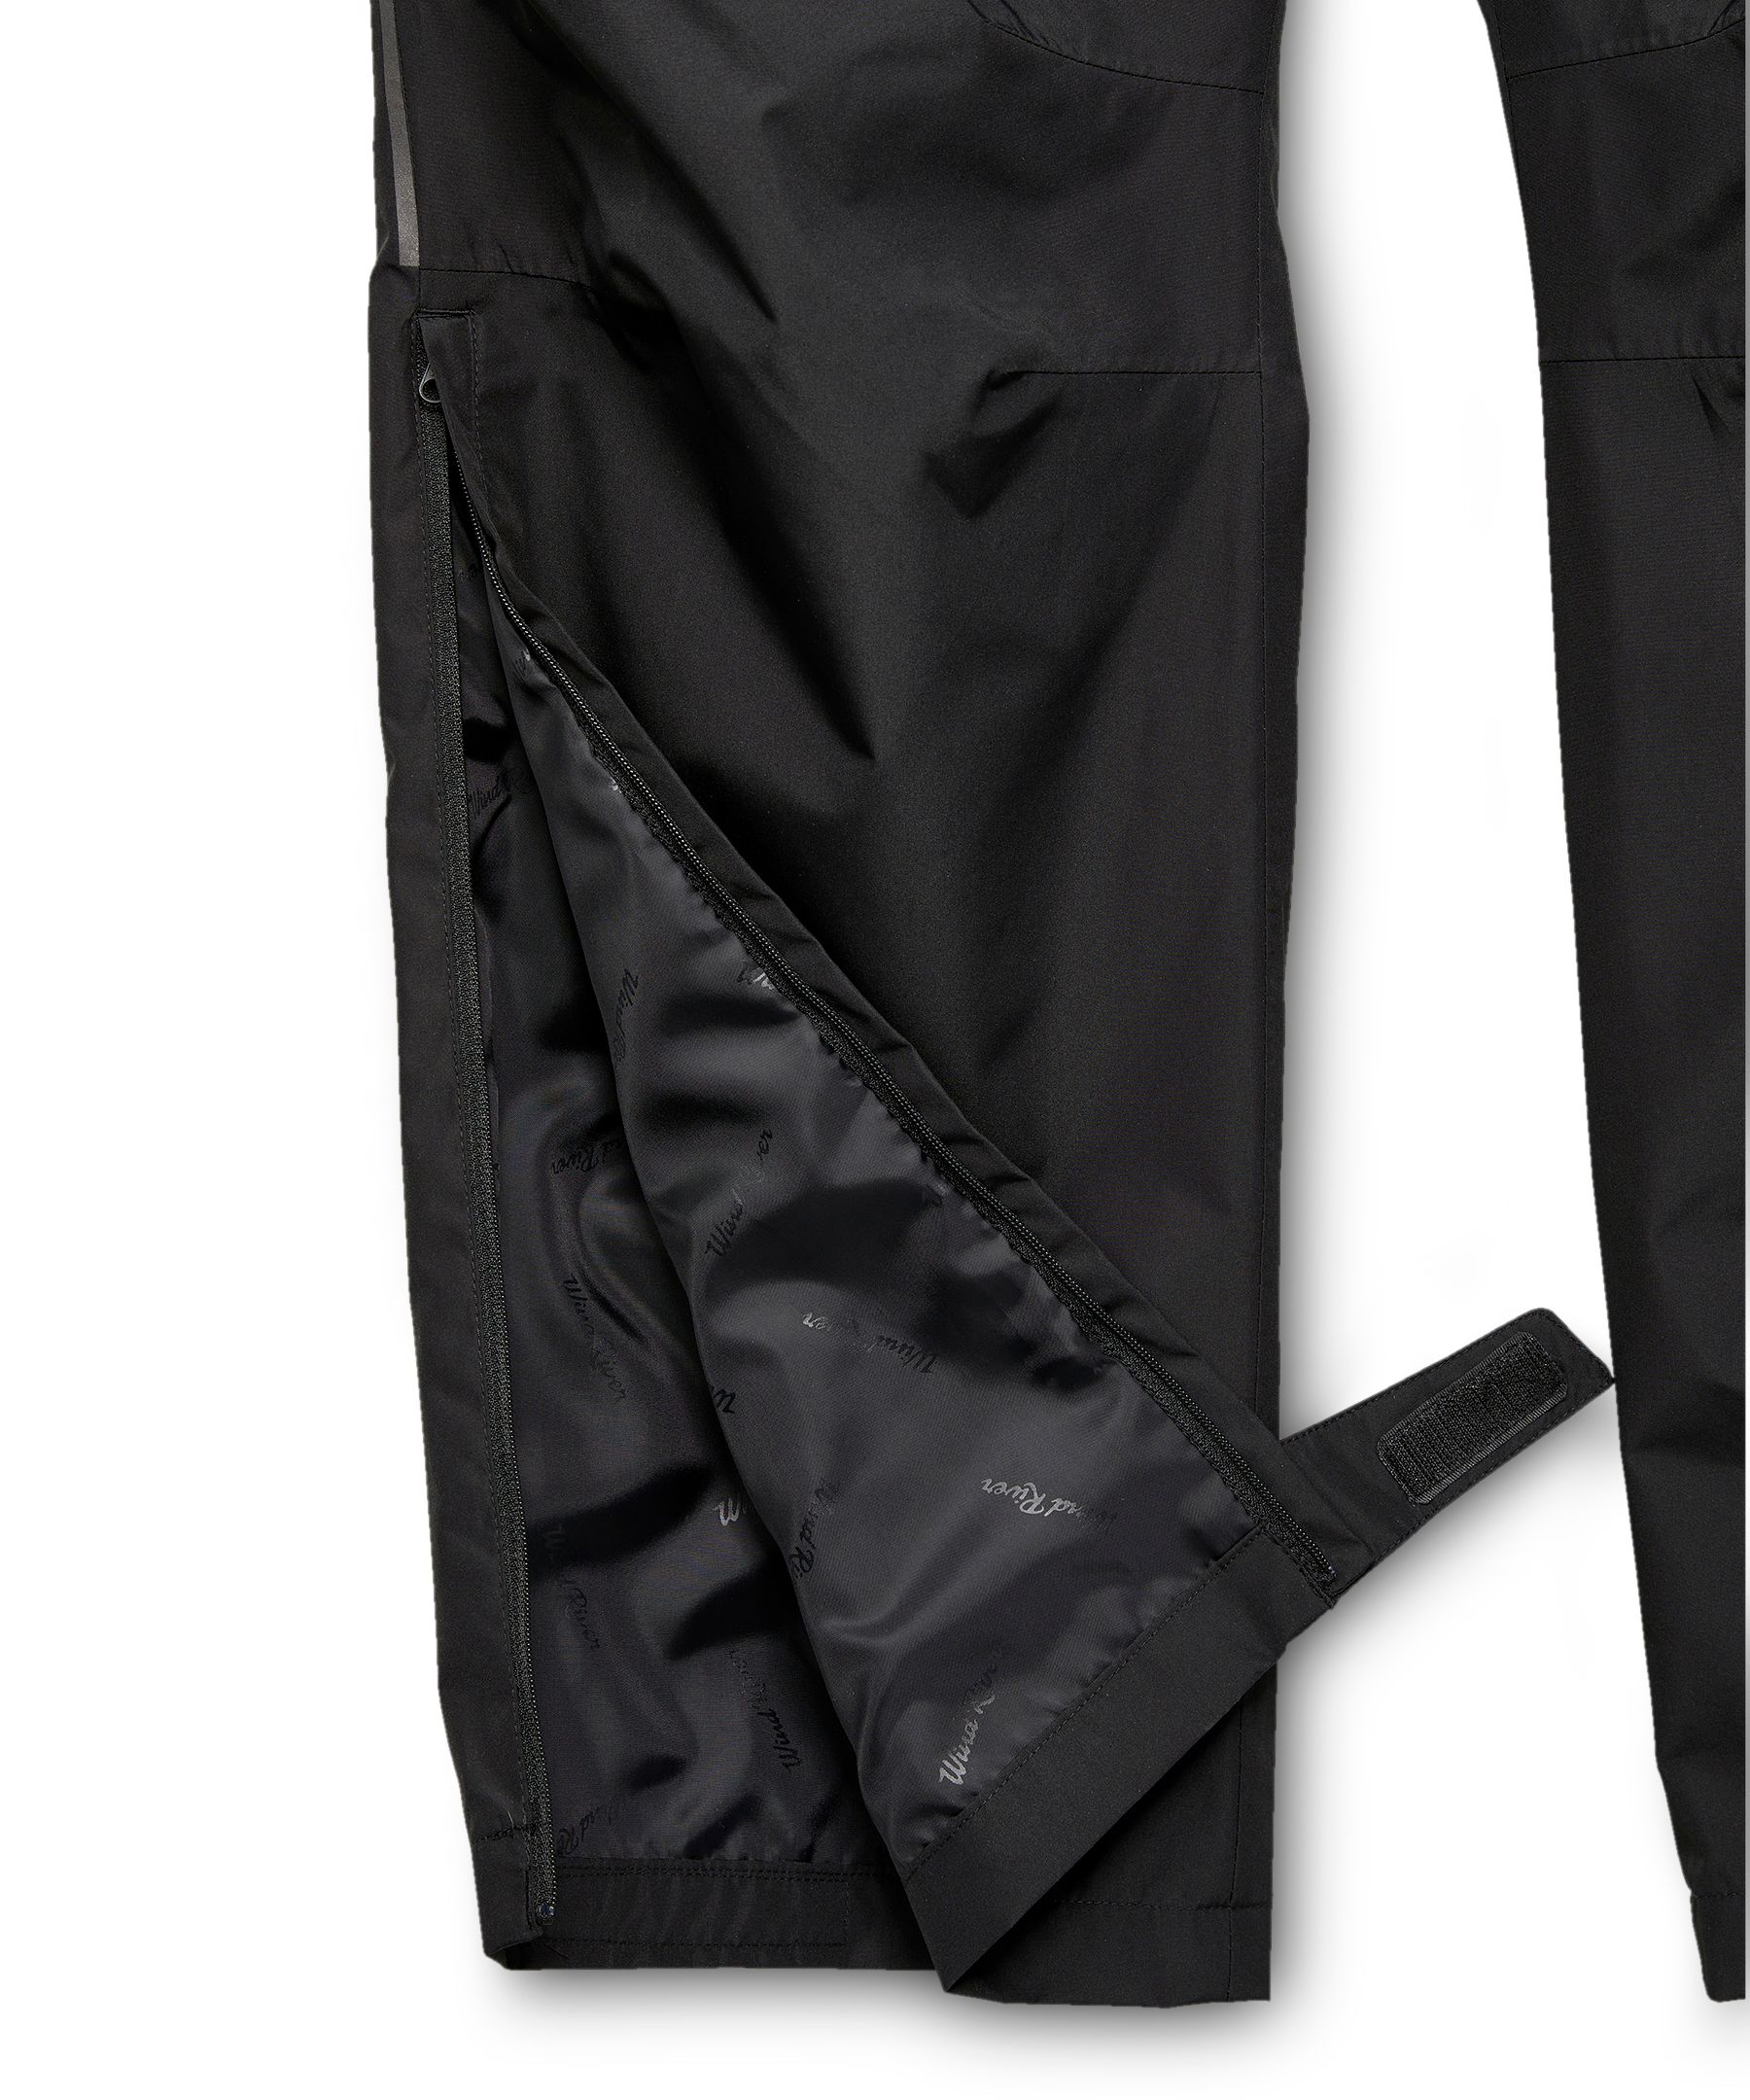 DECATHLON 3691 WATERPROOF over trousers 133-142cm - 10 year old EXCELLENT  COND. £2.99 - PicClick UK